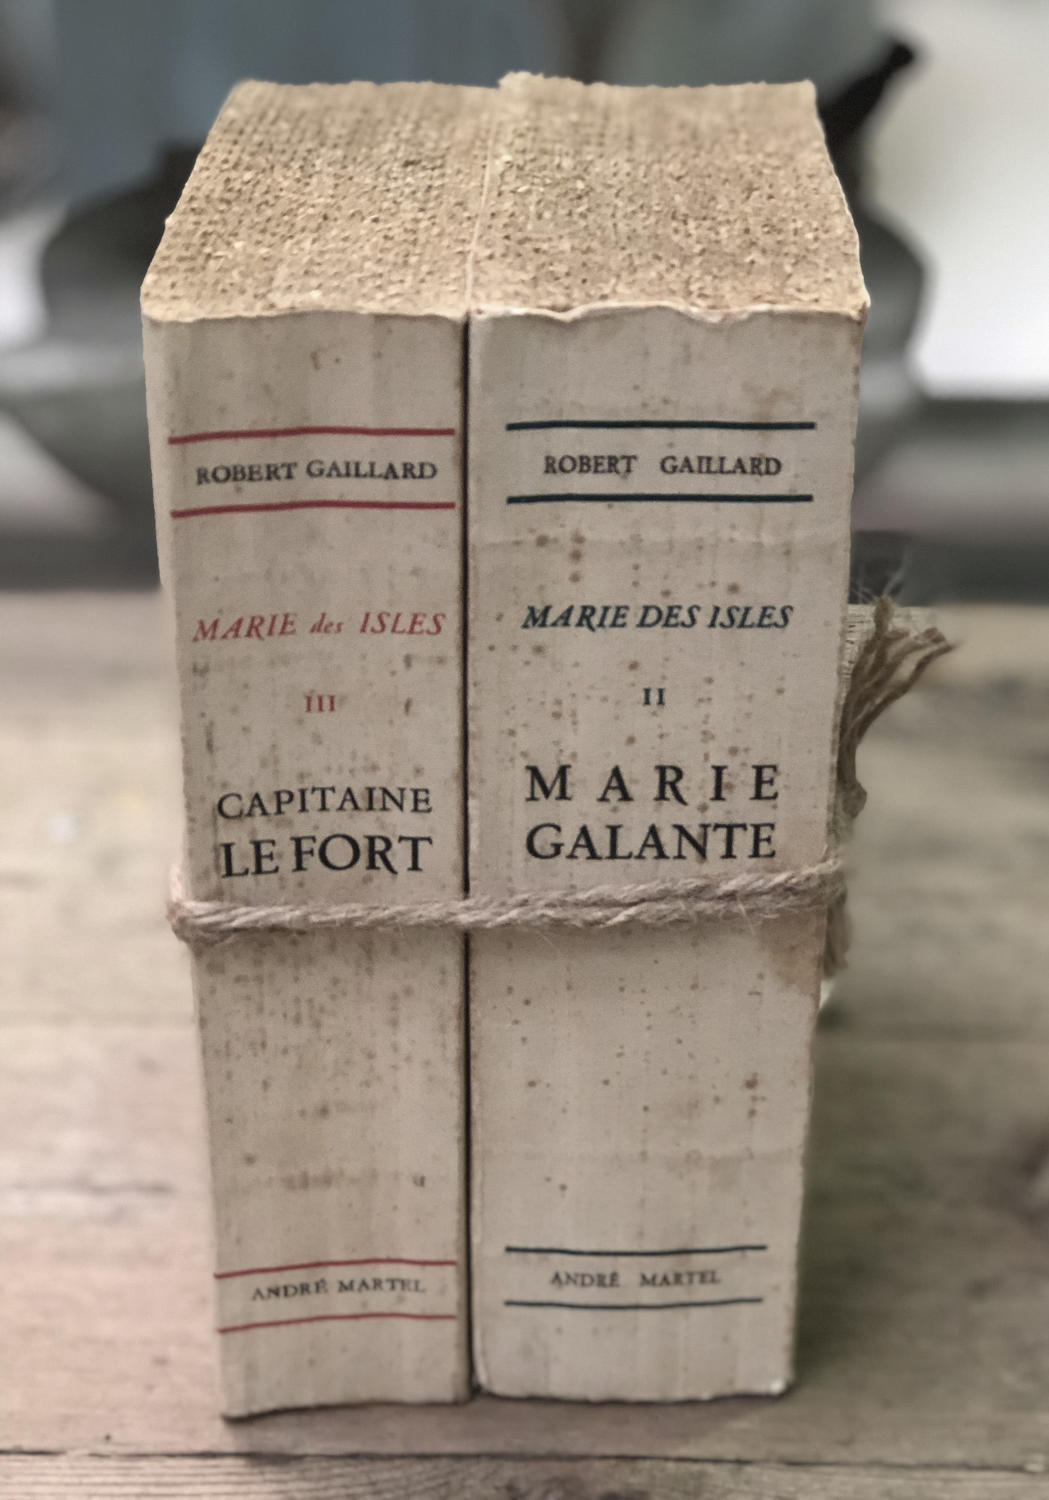 Pair of 20th century French Books - printed 1950